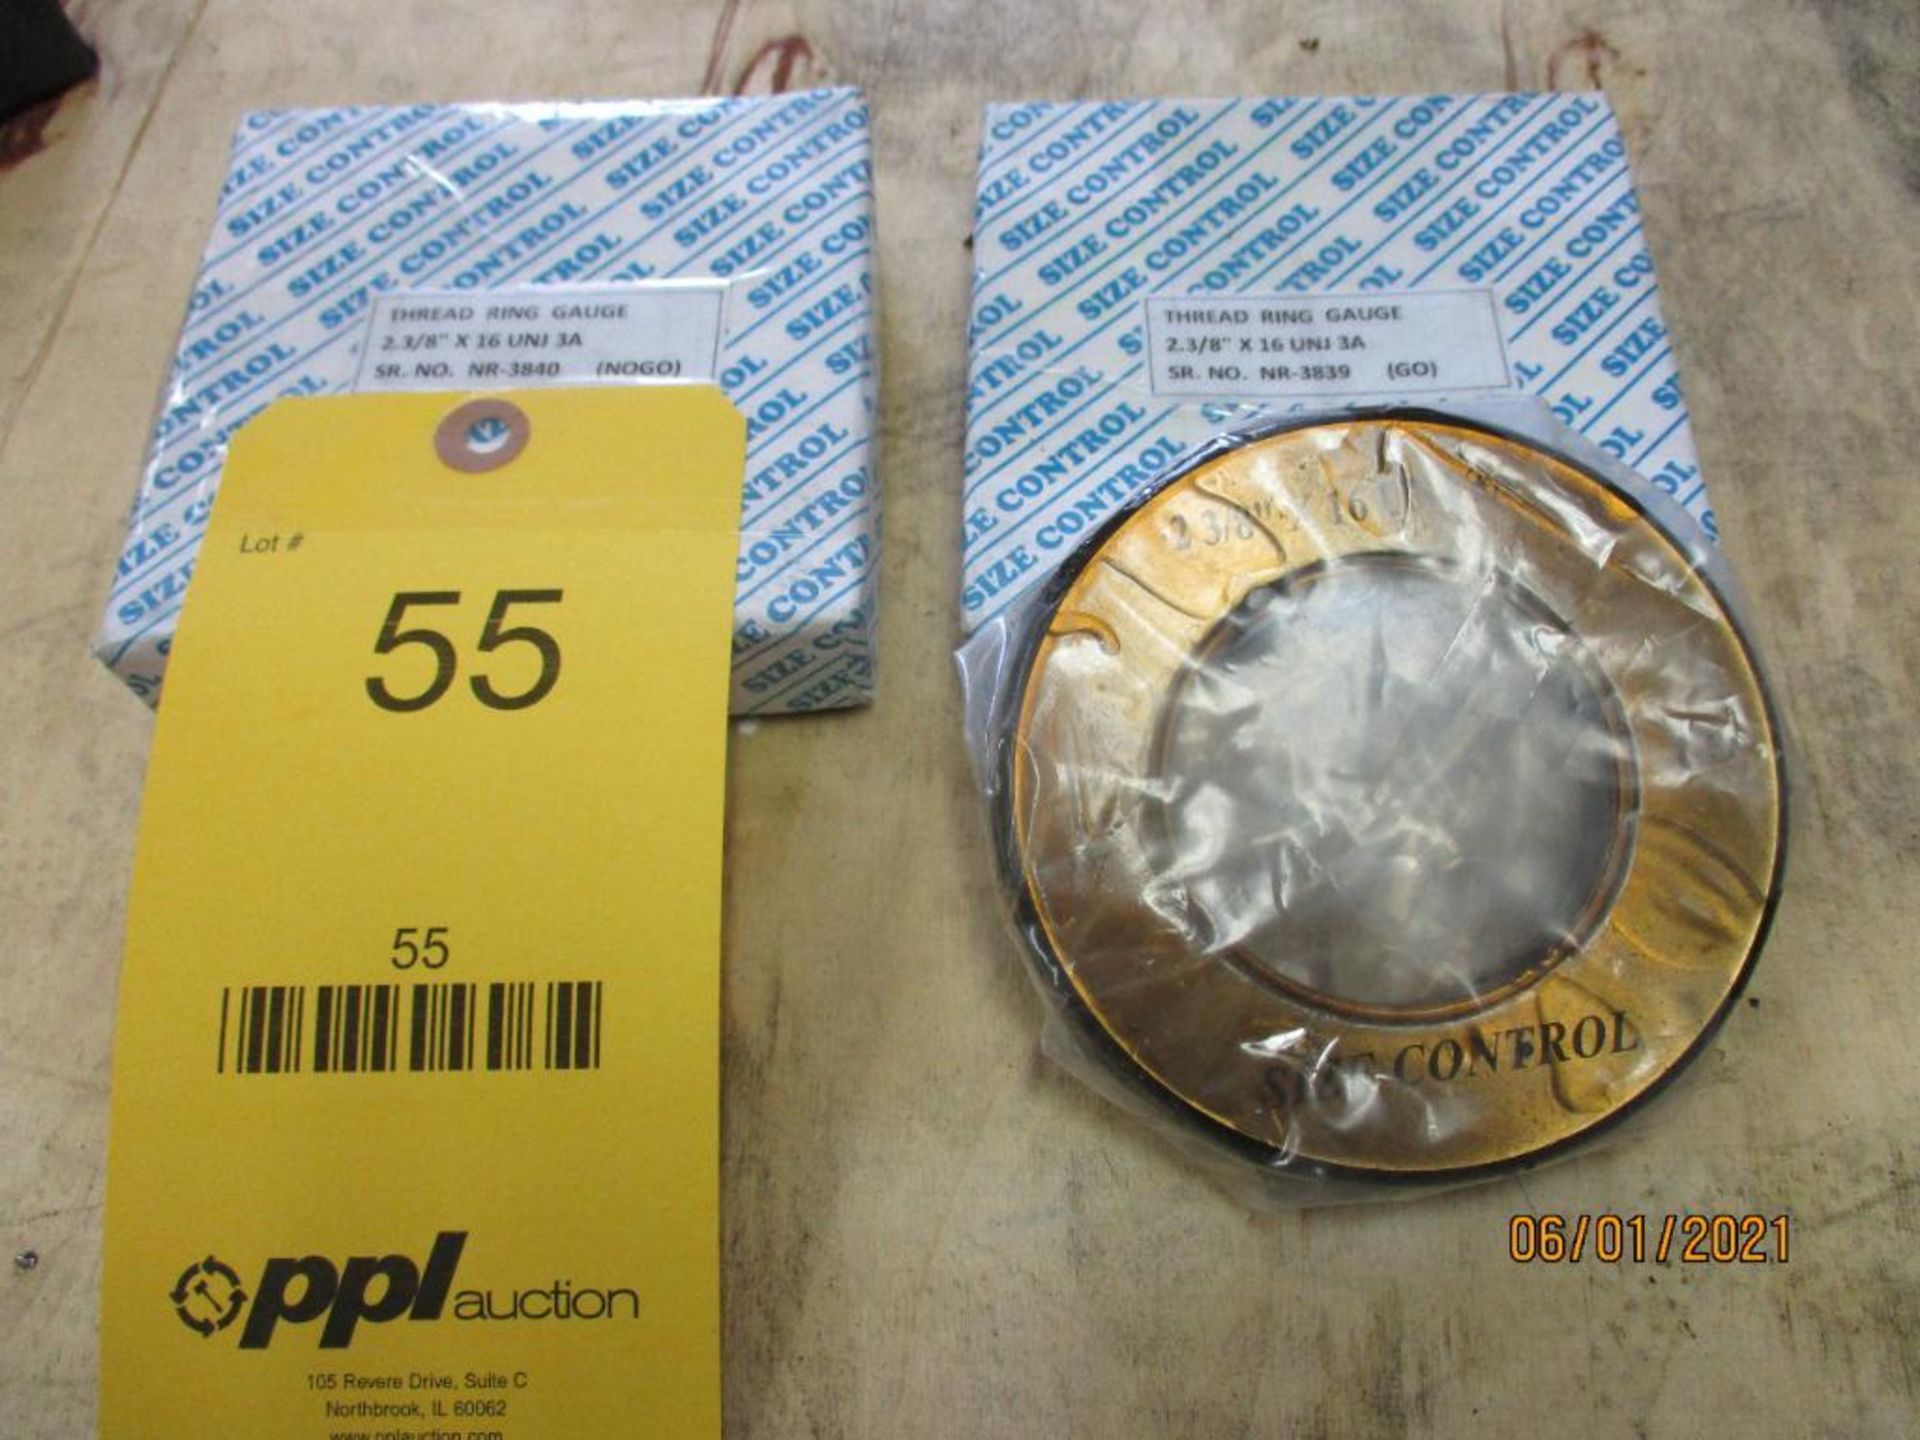 Set of GO/NOGO Thread Ring Gages, 2-3/8 in. - 16 UNJ-3A (All inspection eq. is like New and Mostly